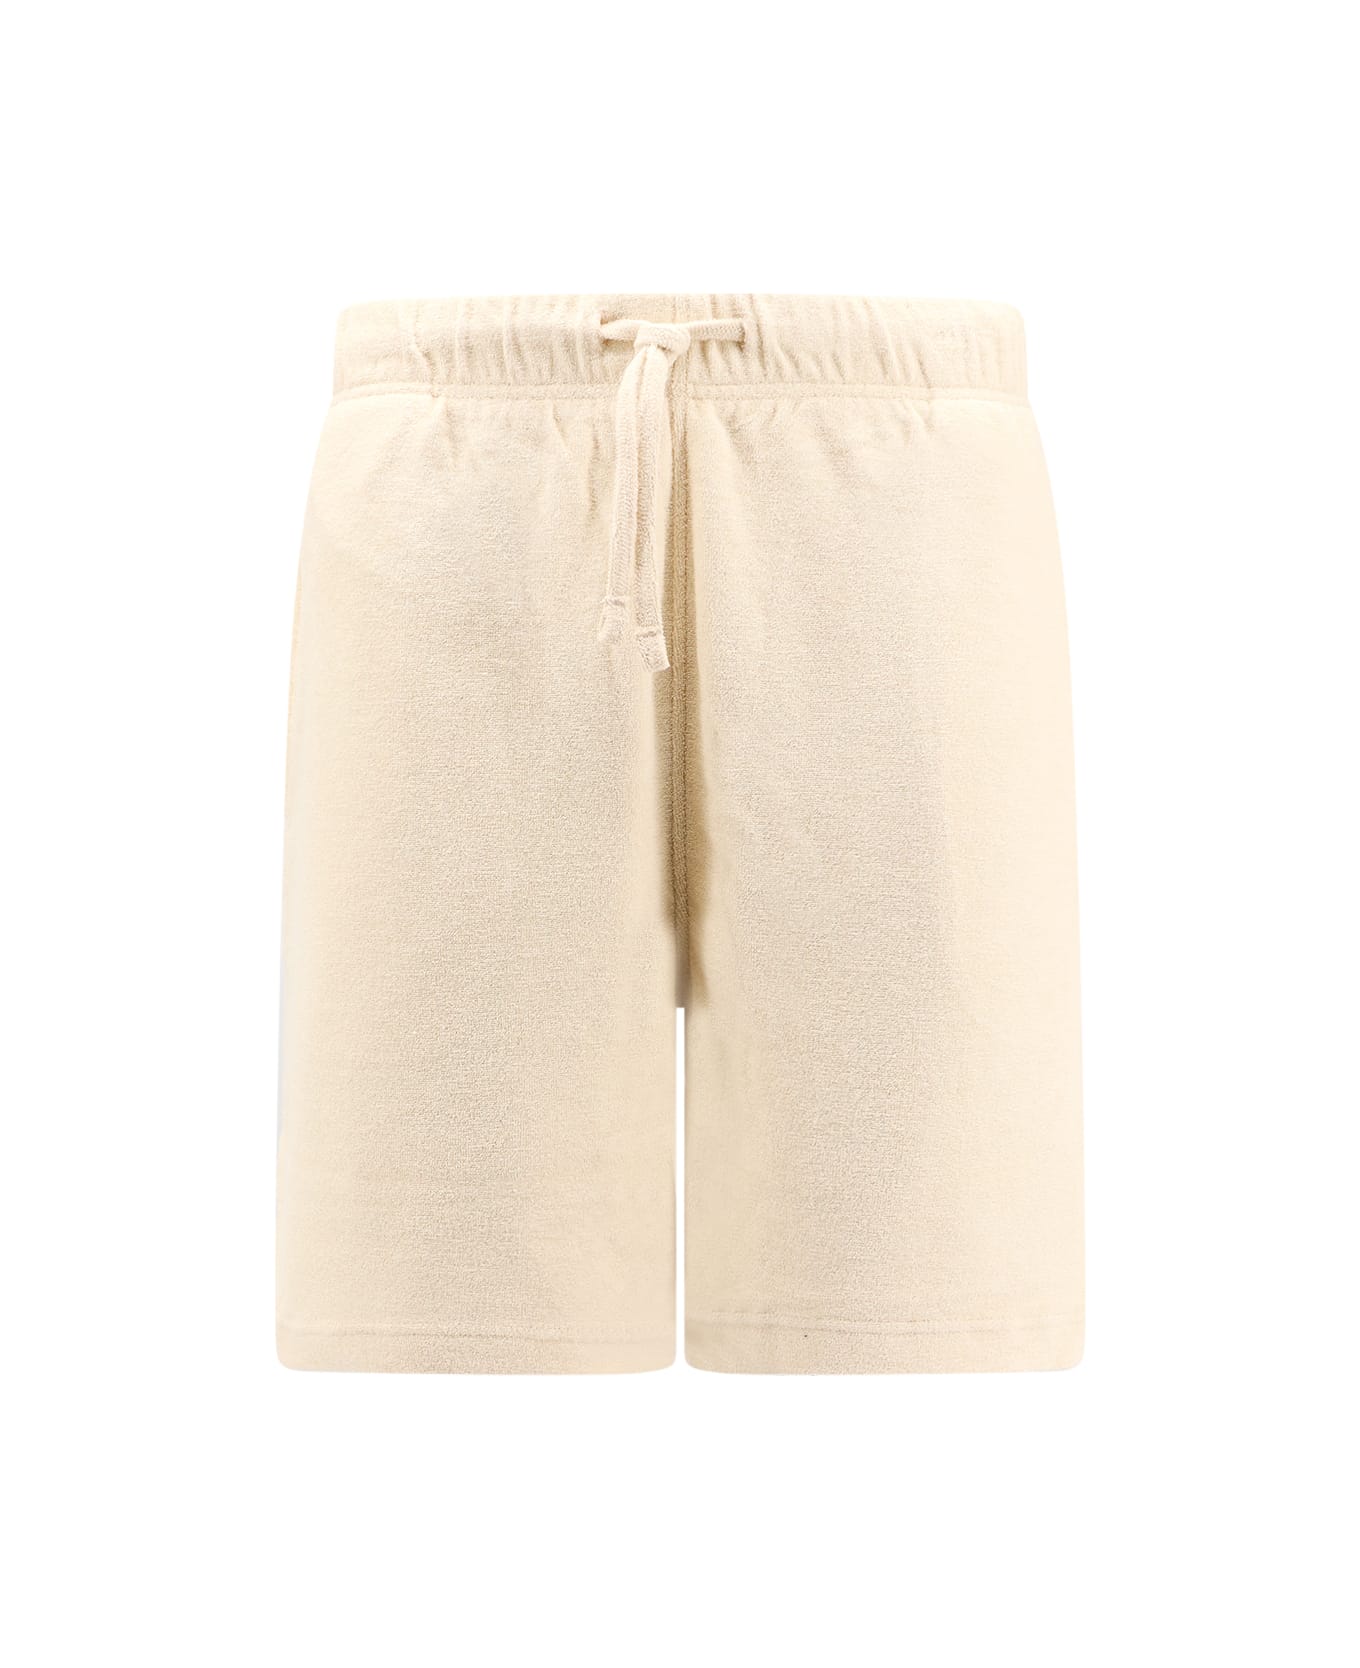 Burberry Cotton Towelling Shorts - Beige